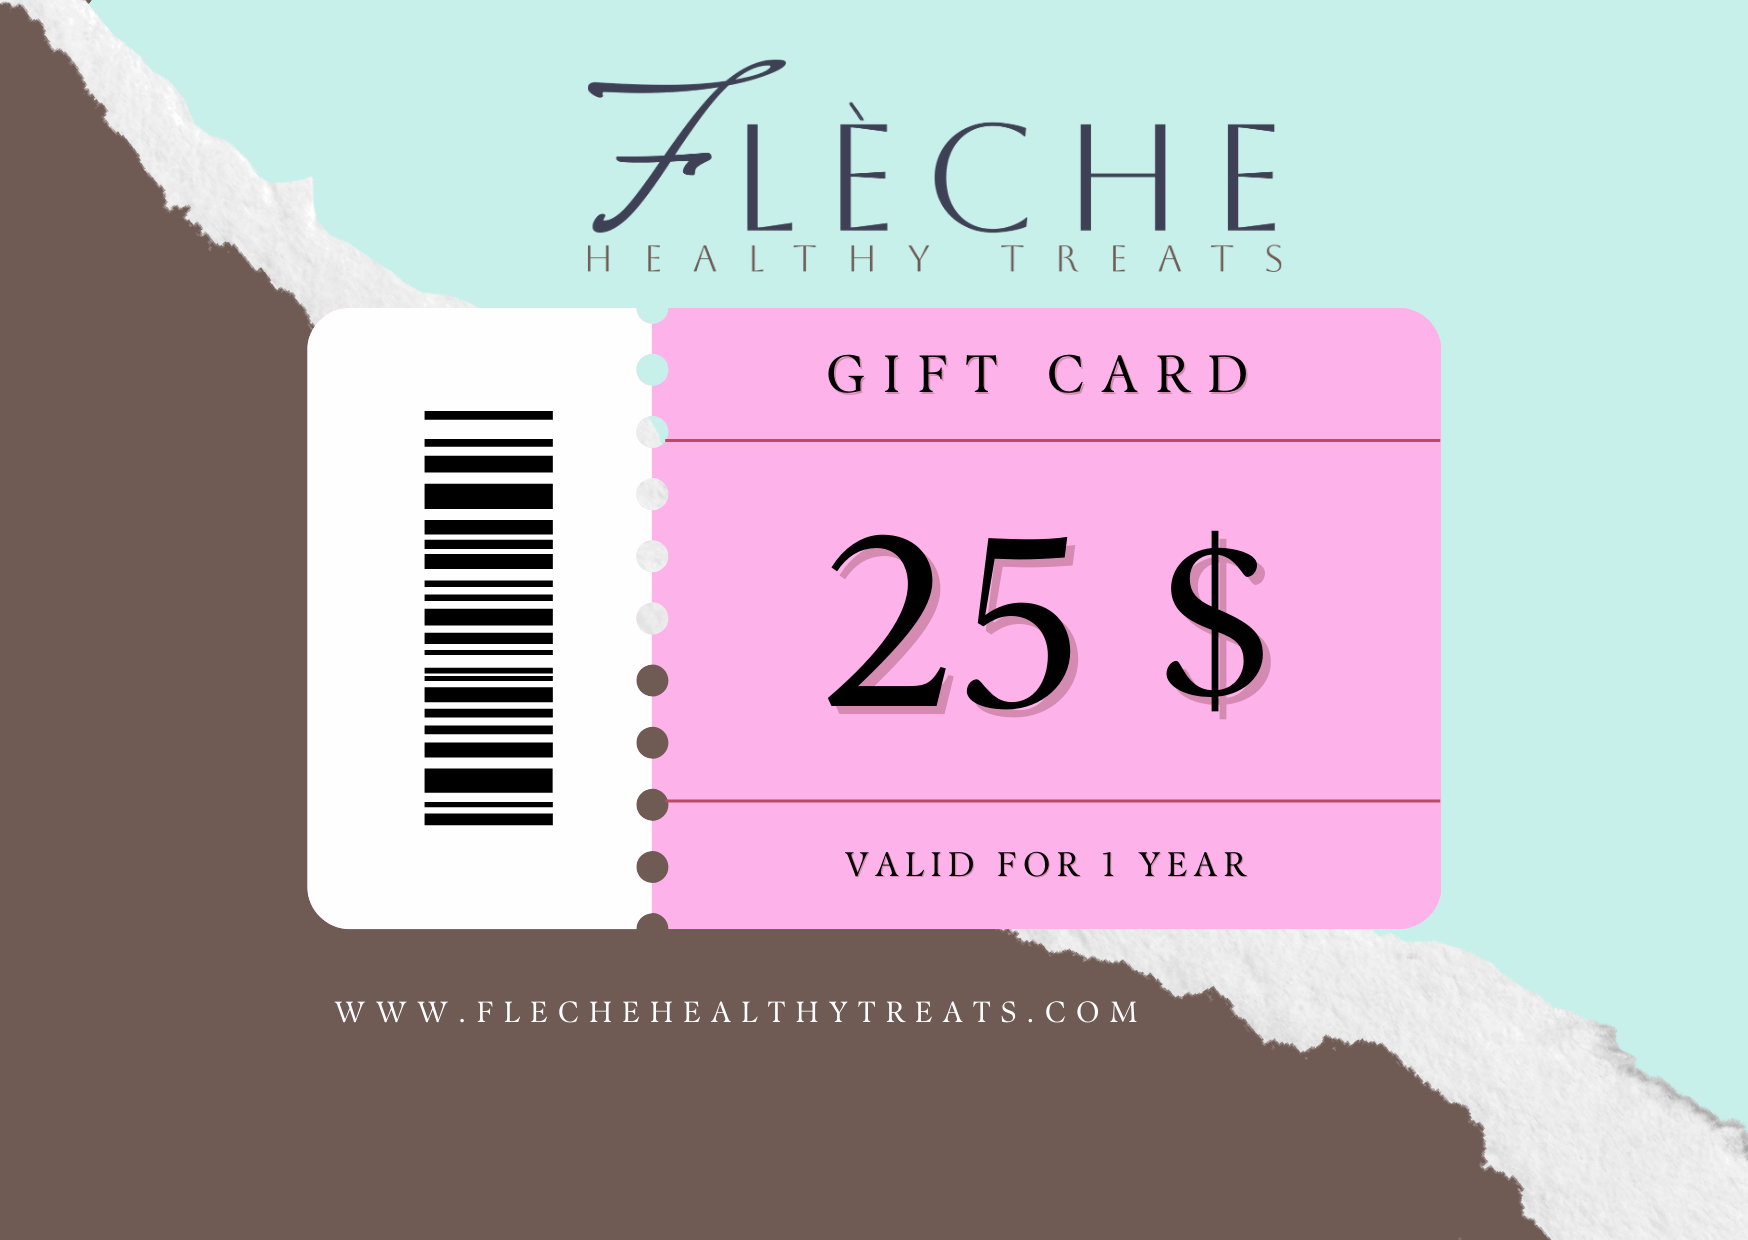 Gift Cards - Delightful and Nutritious Presents - Fleche Healthy Treats